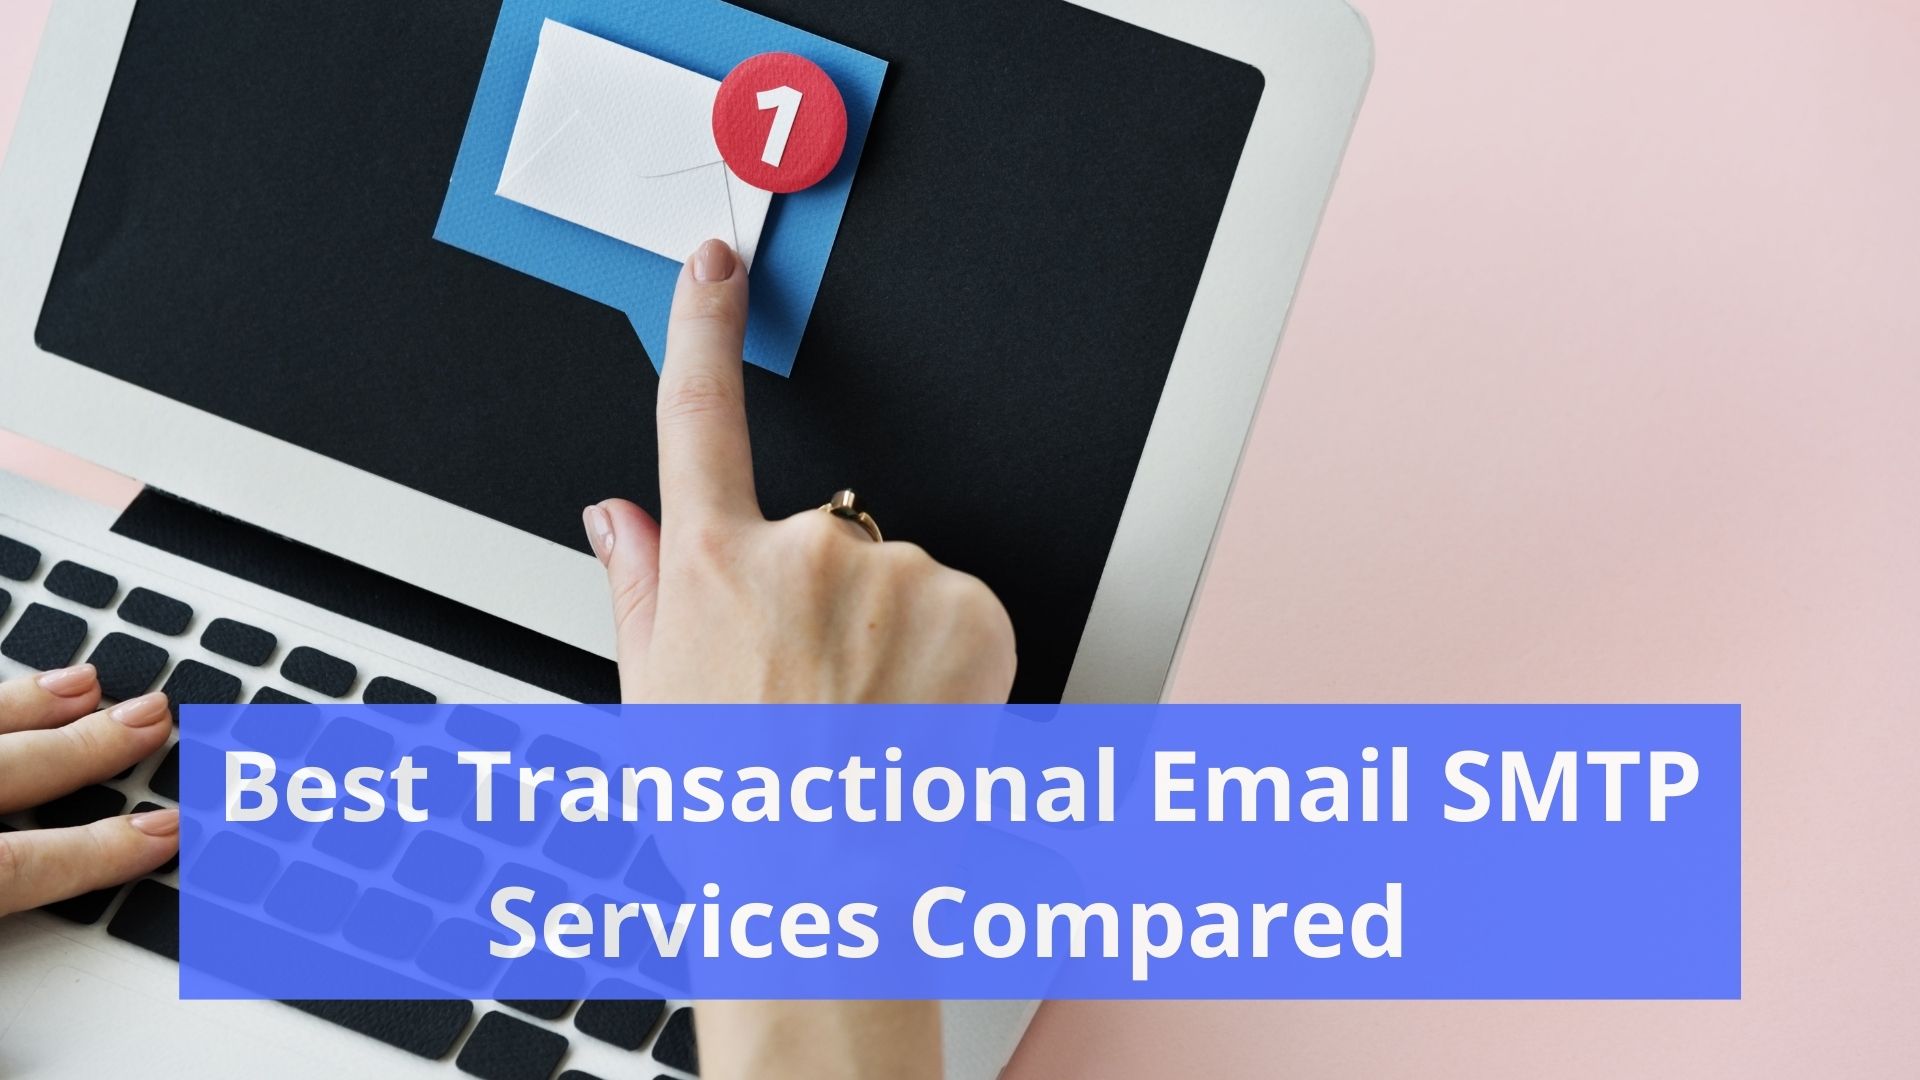 Transactional Email SMTP services